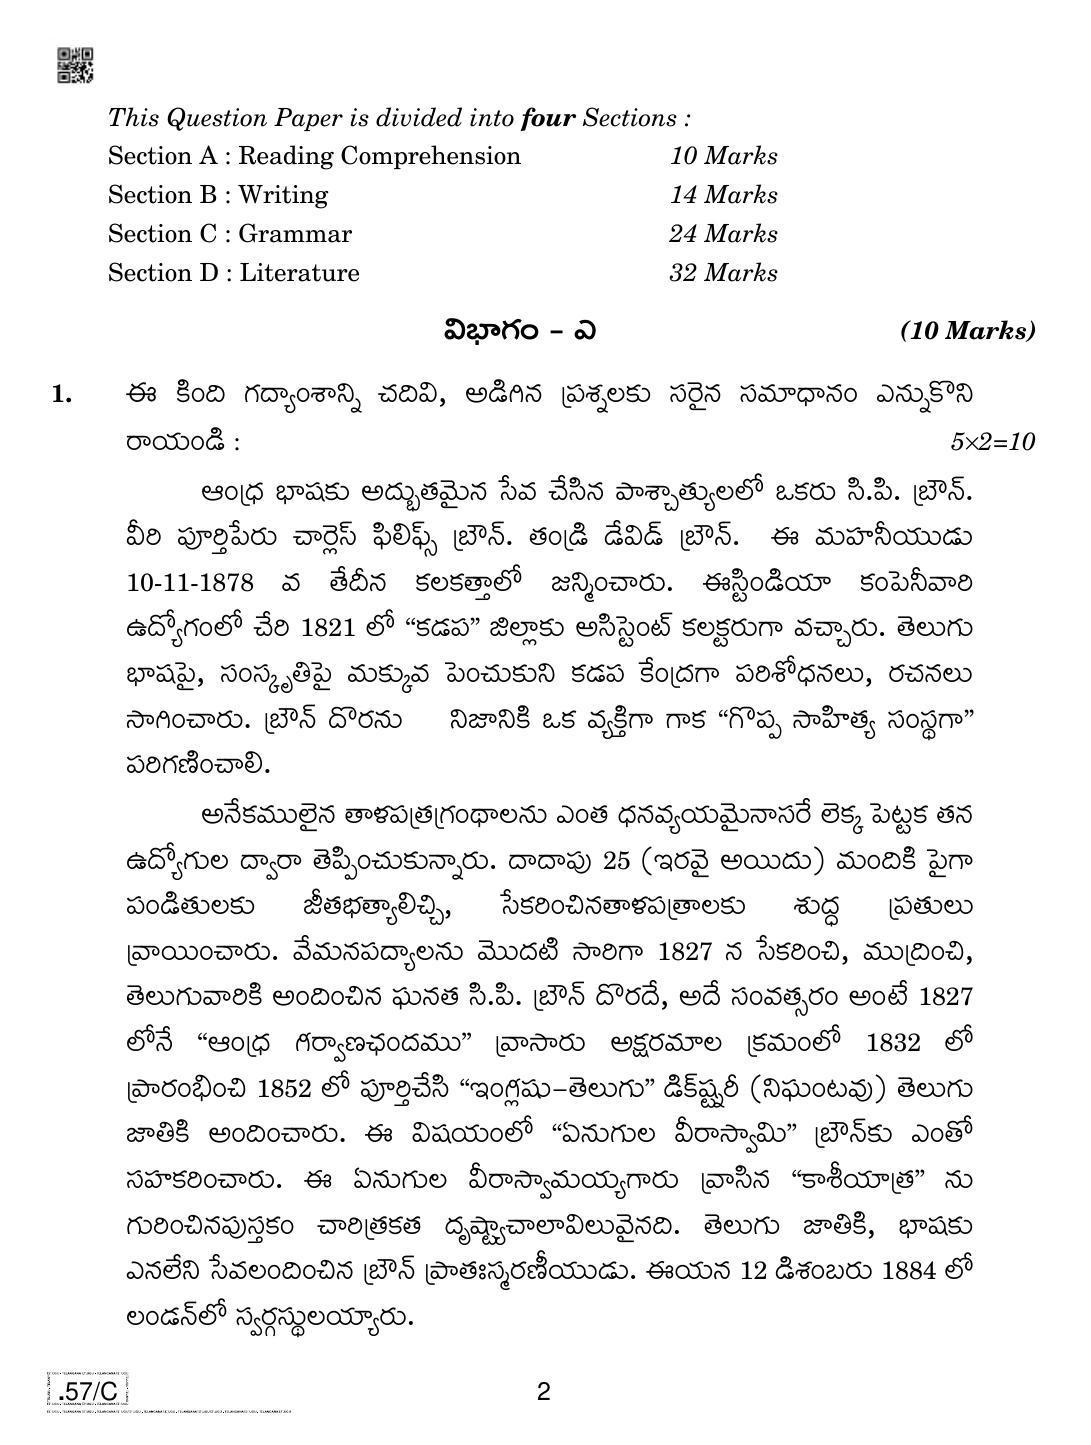 CBSE Class 10 Telug Telangana 2020 Compartment Question Paper - Page 2